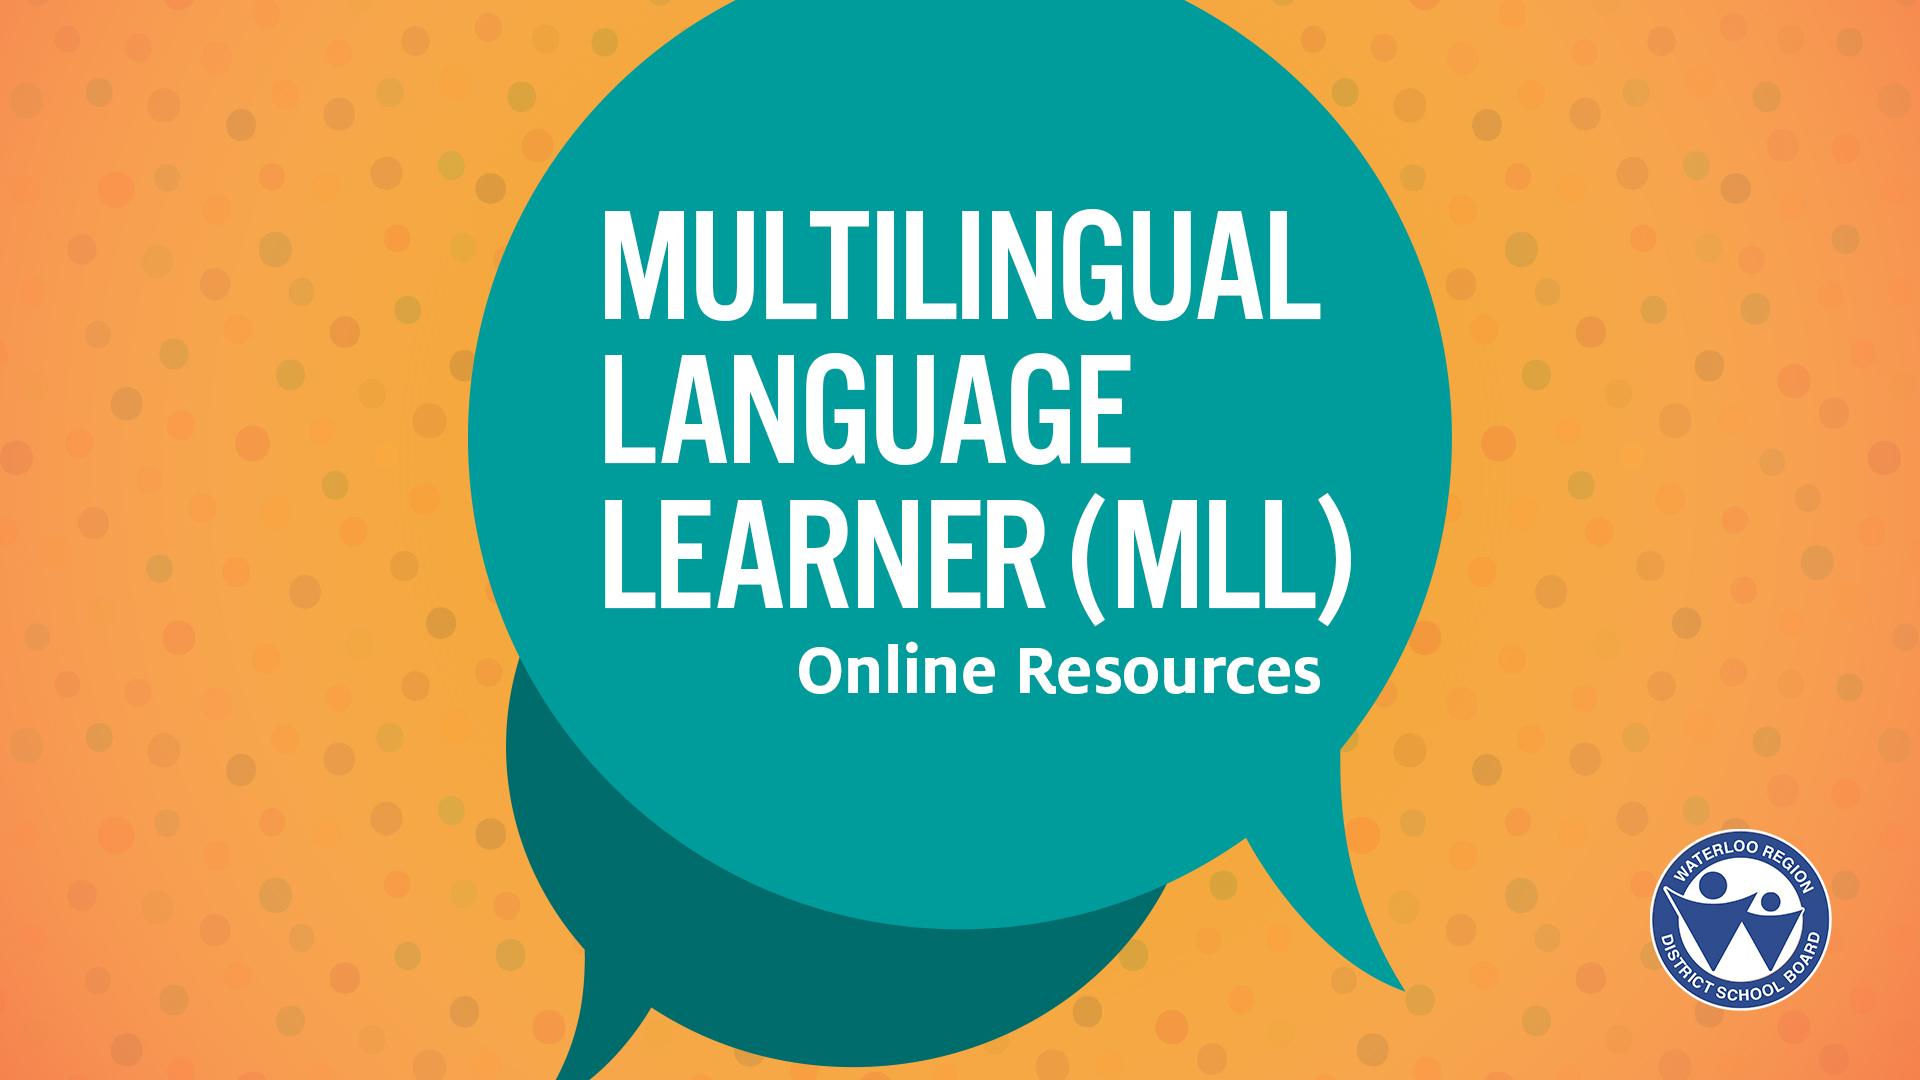 Multilingual Language Learner (MLL) Online Resources